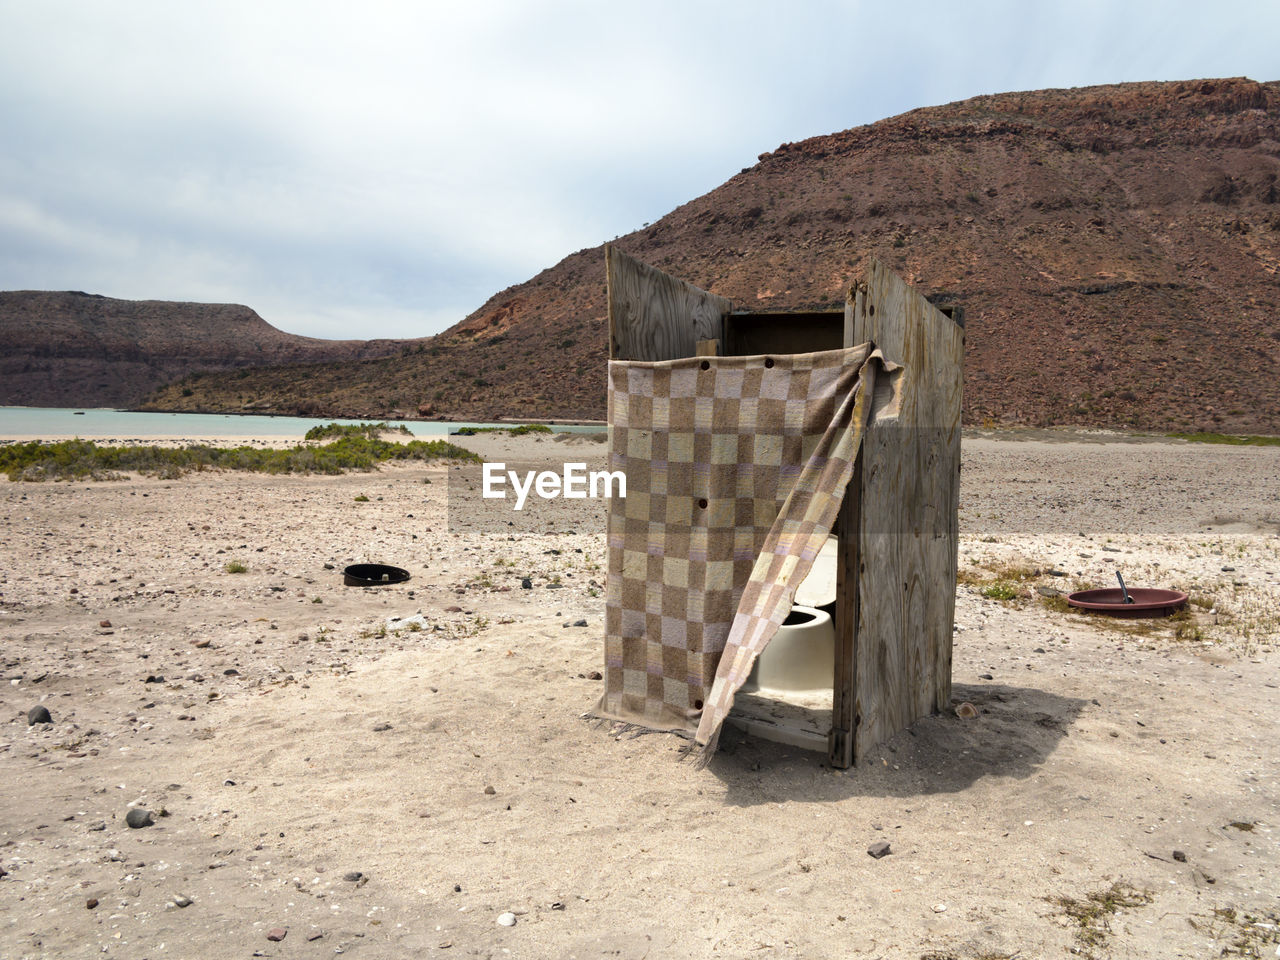 Outhouse by mountain at desert against sky